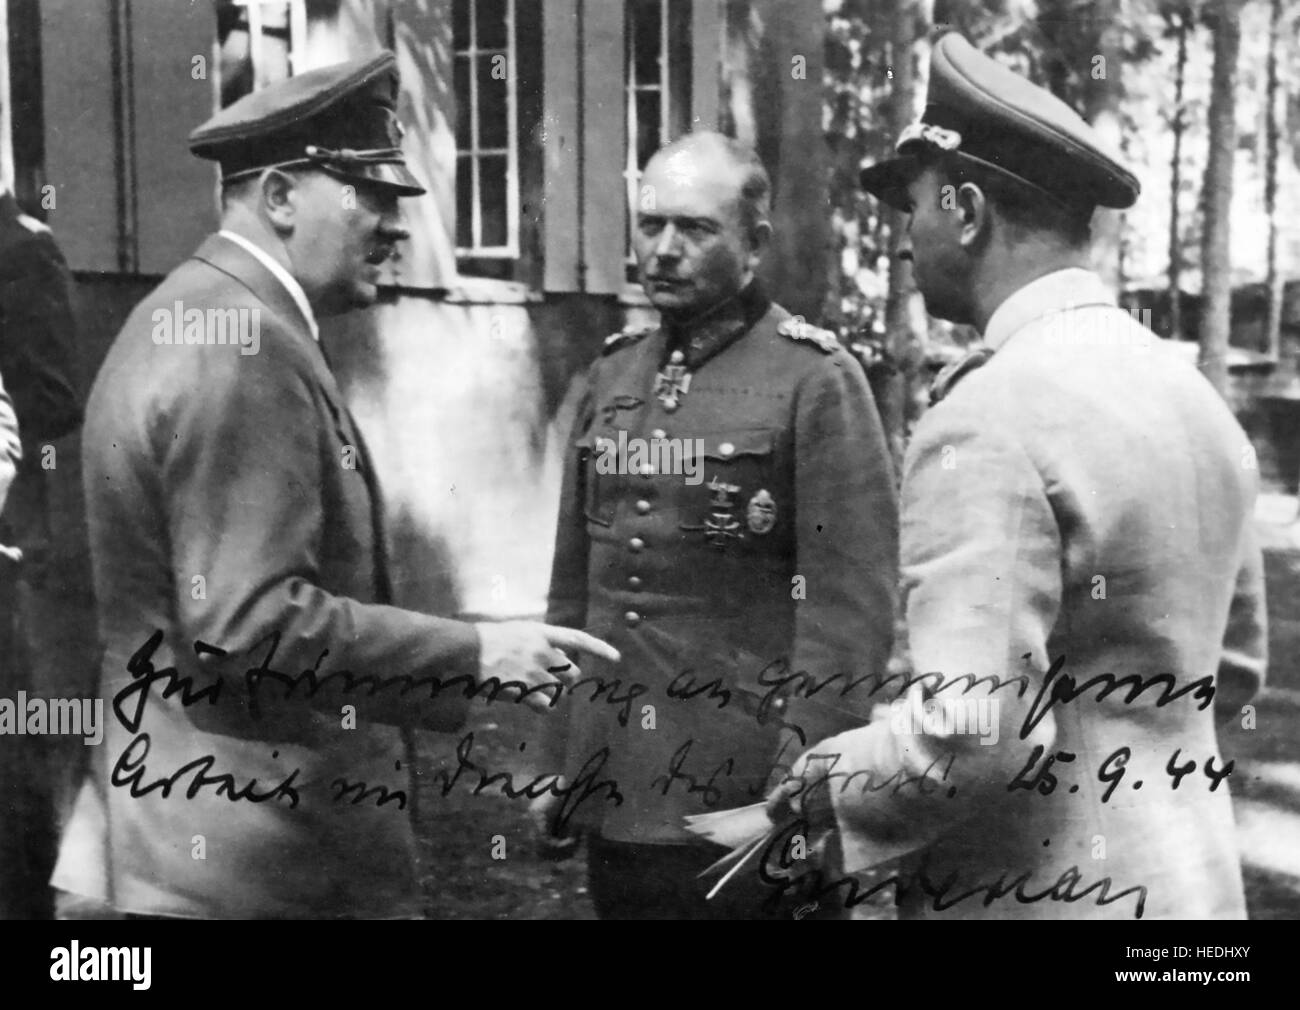 HEINZ GUDERIAN (1888-1954) German Panzer leader (centre) with Hitler at left and Hermann Fegelin. Autographed photo given by Guderian to Fegelein on 15 September 1944 with the words "In memory of joint effort in the service of our Fuehrer" Stock Photo